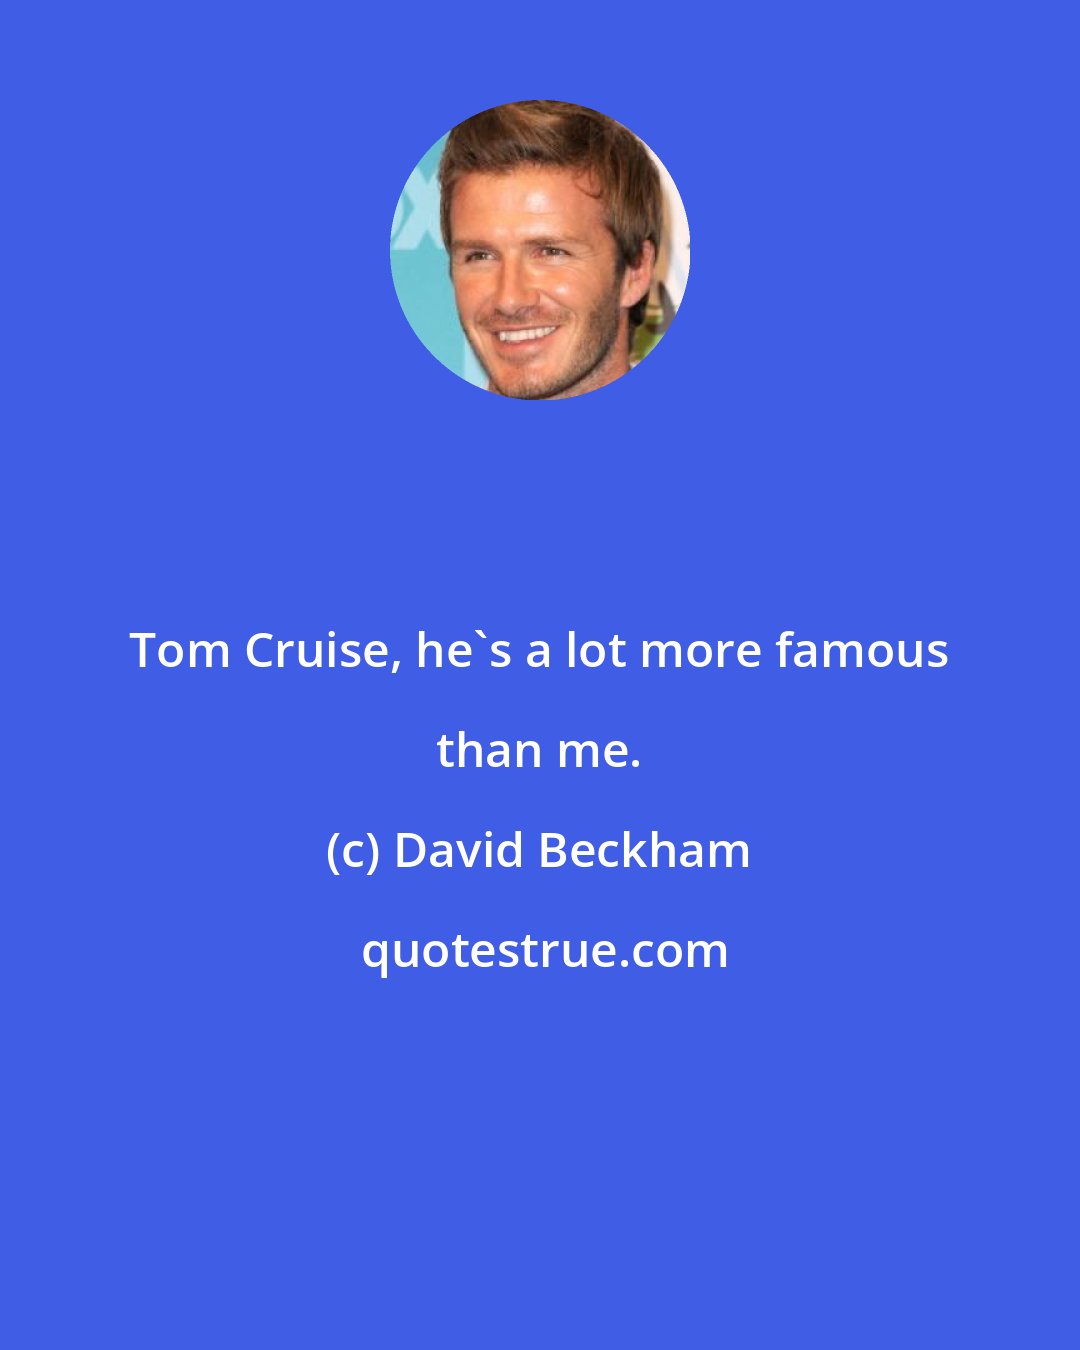 David Beckham: Tom Cruise, he's a lot more famous than me.